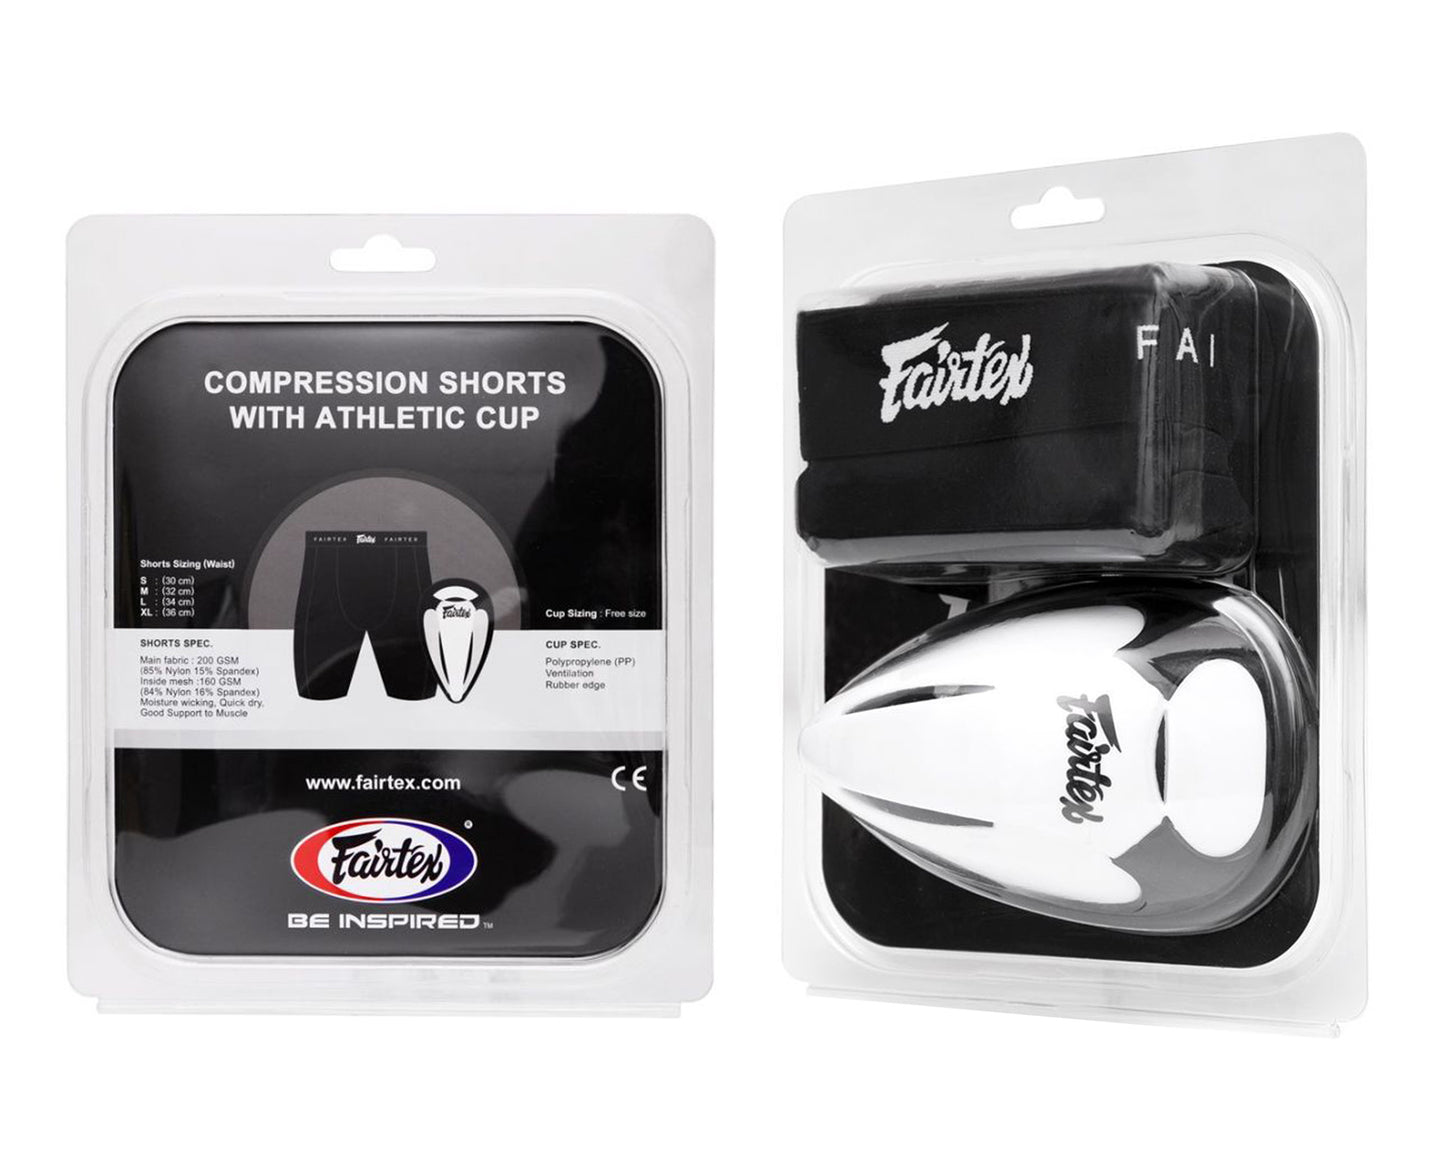 Fairtex GC3 Compression shorts with Athletic Cup